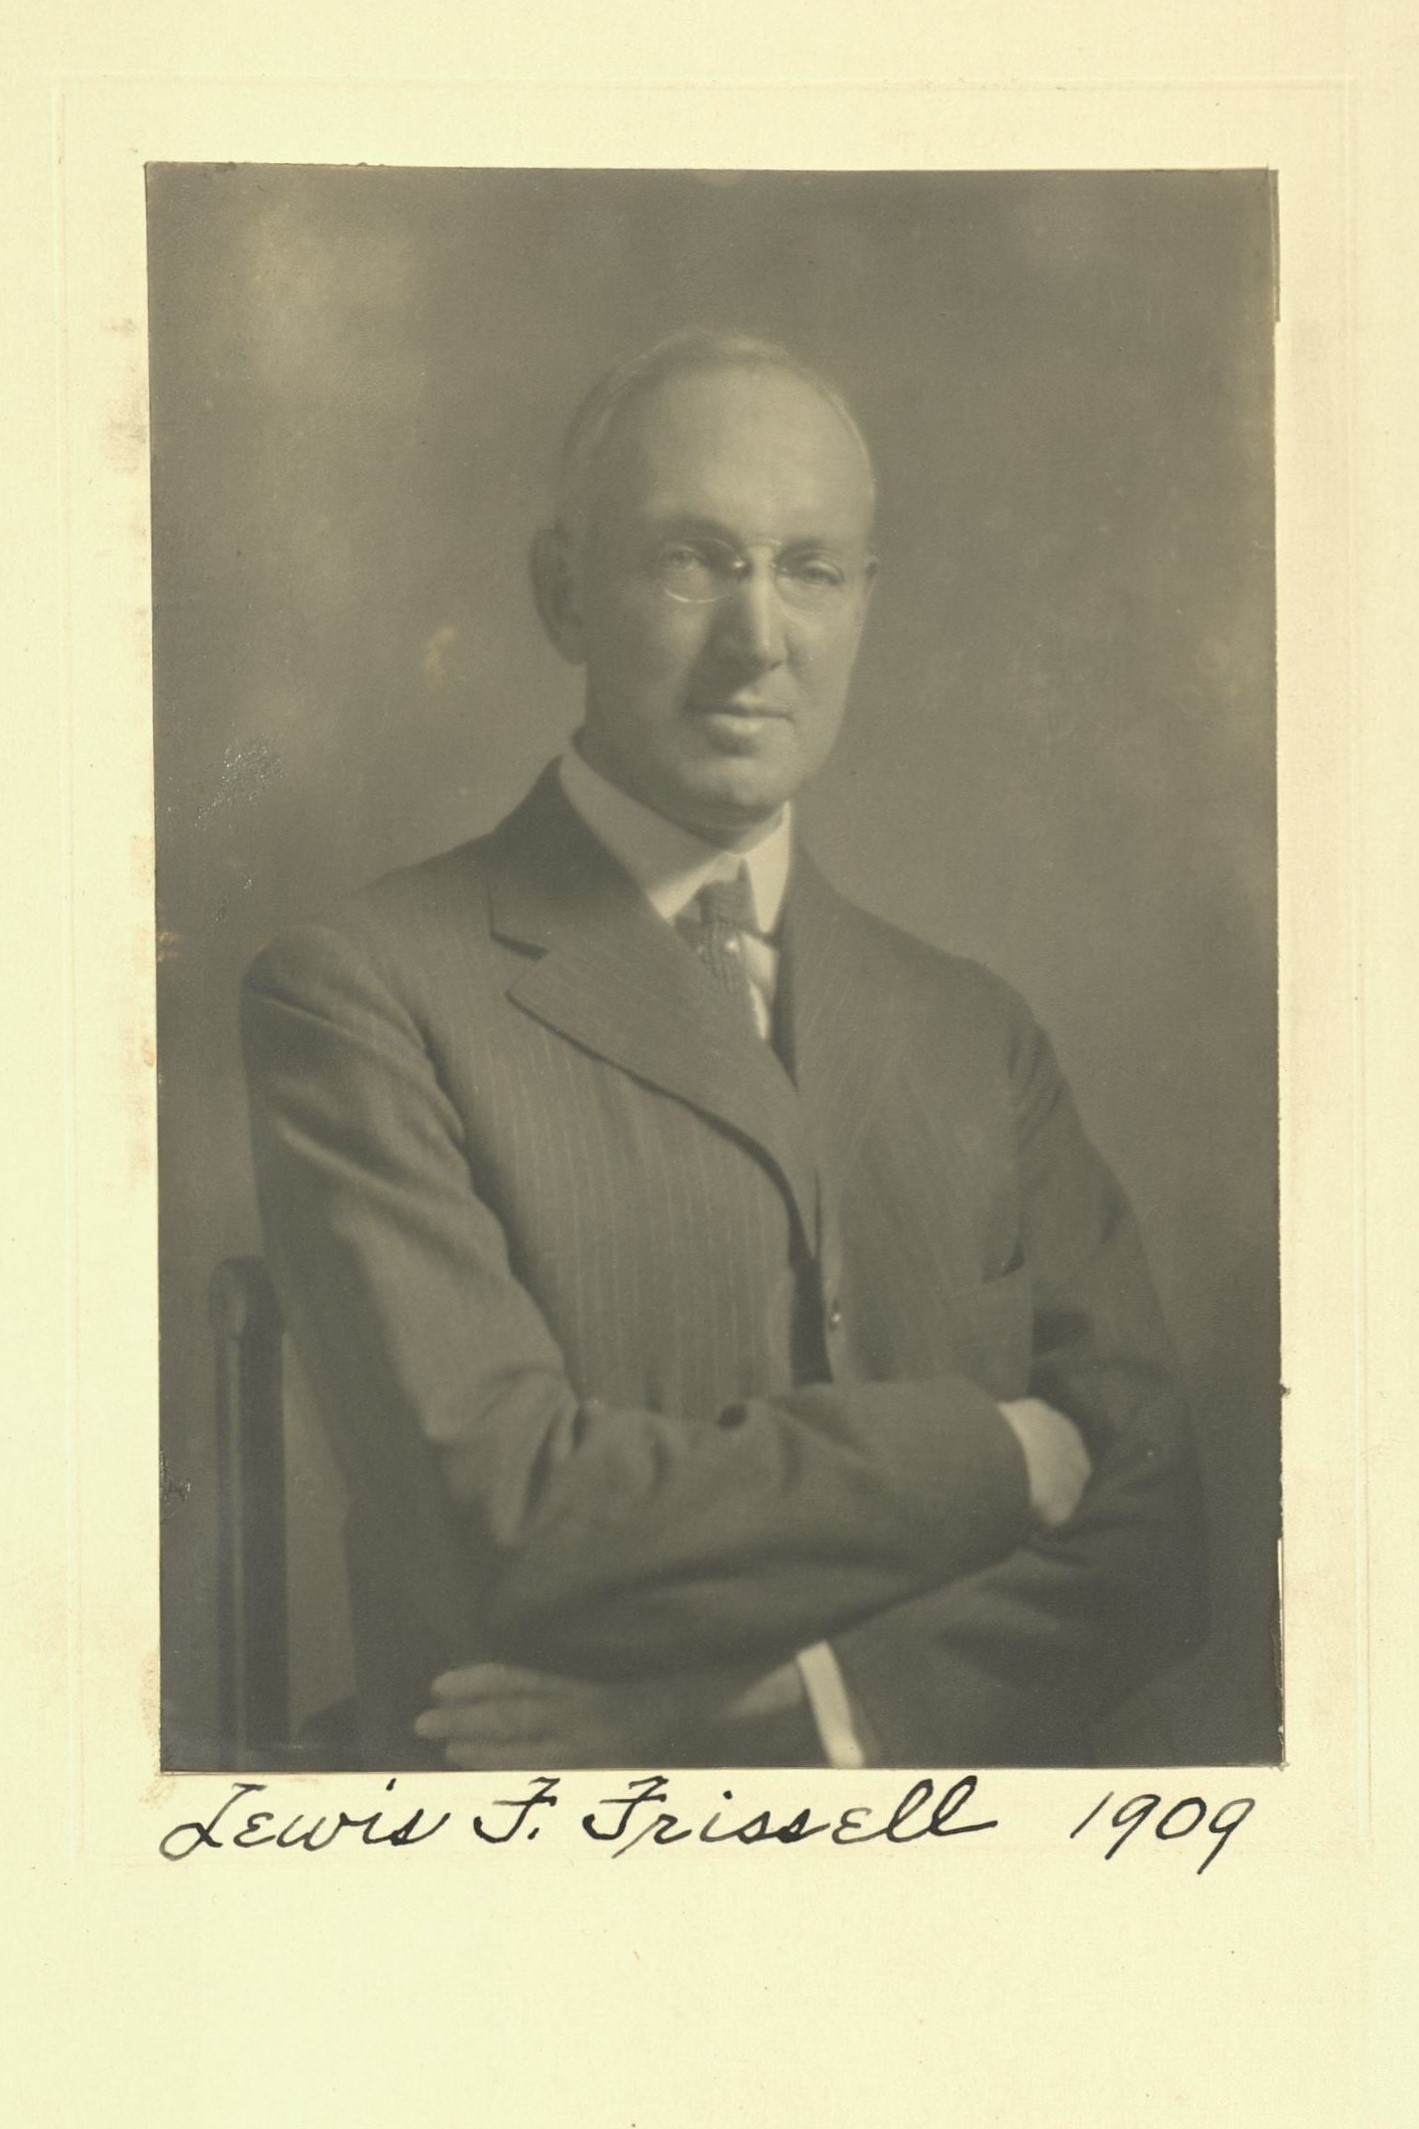 Member portrait of Lewis F. Frissell